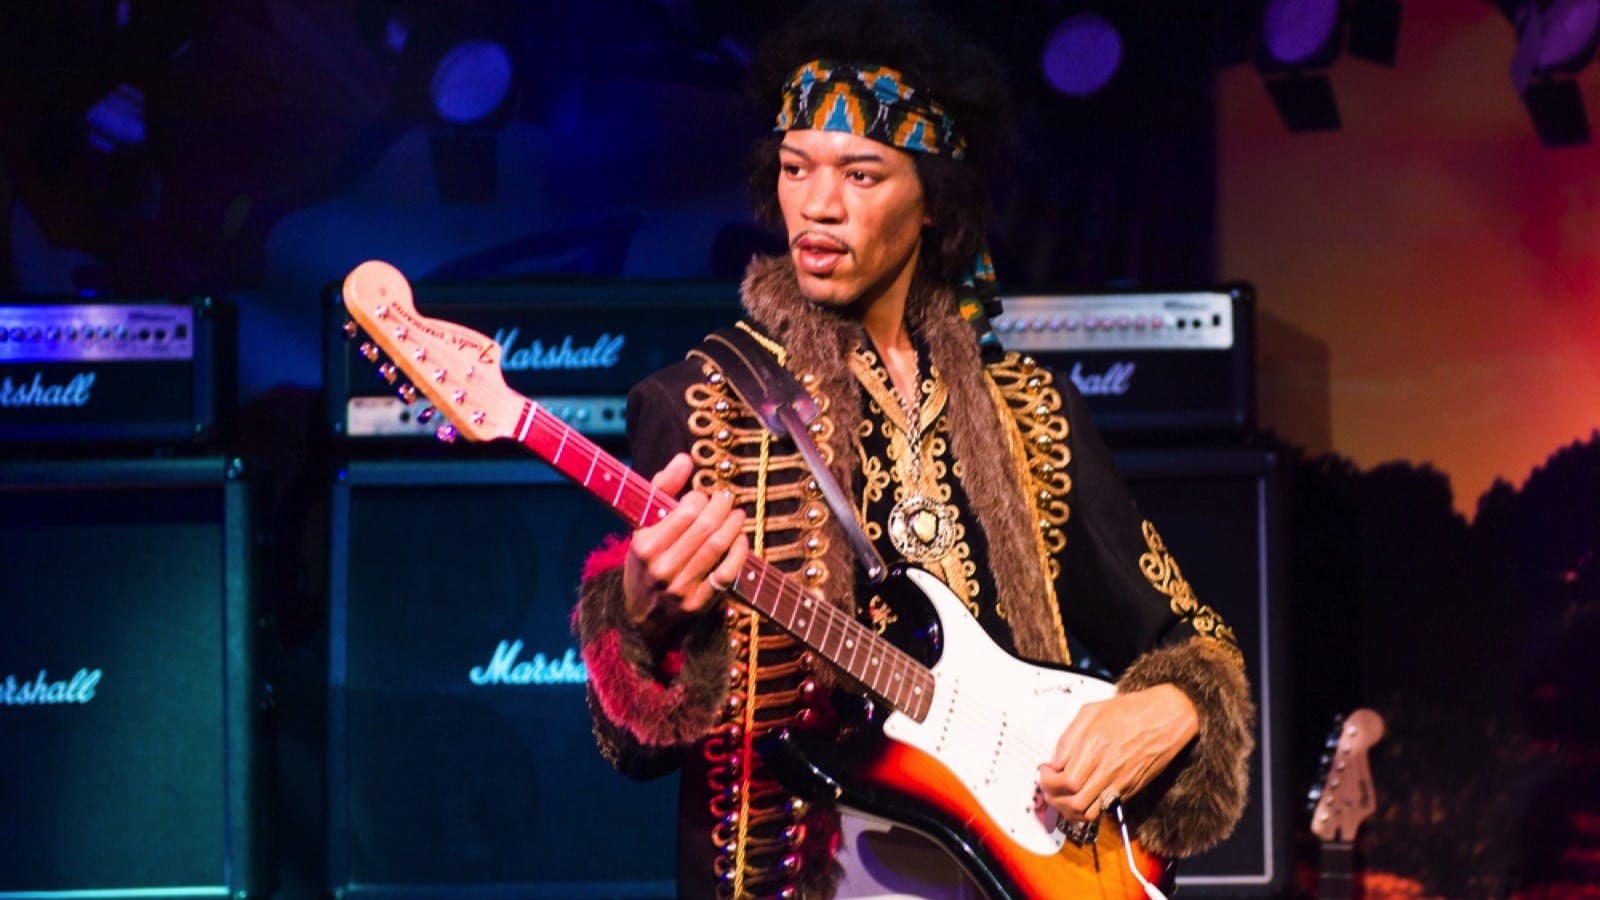 SAN FRANCISCO, USA - OCT 5, 2015: Jimi Hendrix at the Madame Tussauds museum in SF. It was open on June 26, 2014